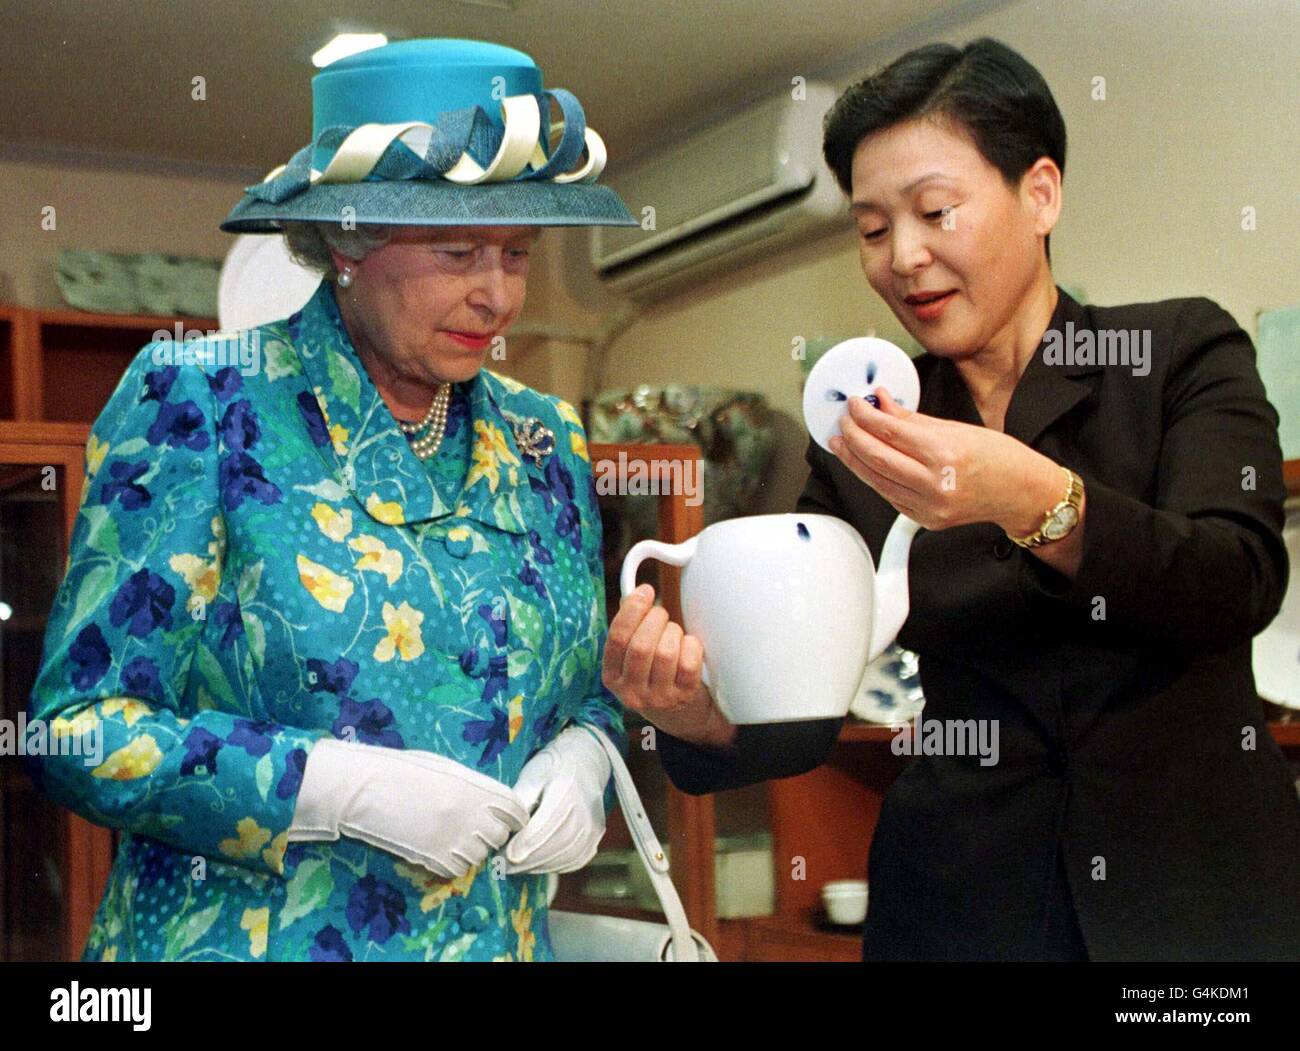 The Queen is shown a celadon teapot, during a visit to a pottery shop in Seoul, South Korea. Celadon is a grey-green glaze used on pottery. The Queen and Duke of Edinburgh arrived in Seoul 19/04/99 for a four-day state visit, the first by a British monarch. Stock Photo